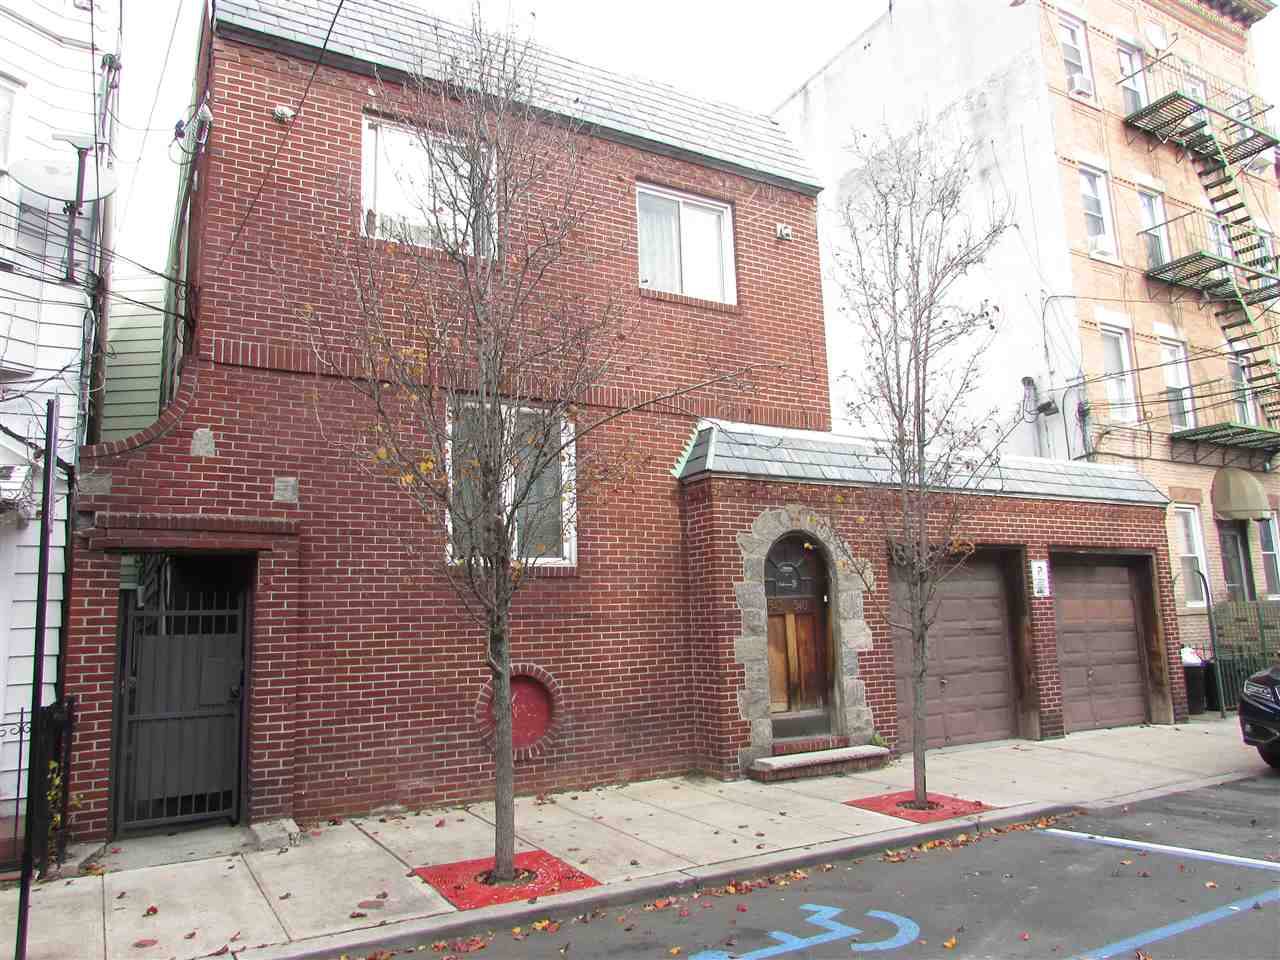 542 540 27TH ST Multi-Family New Jersey